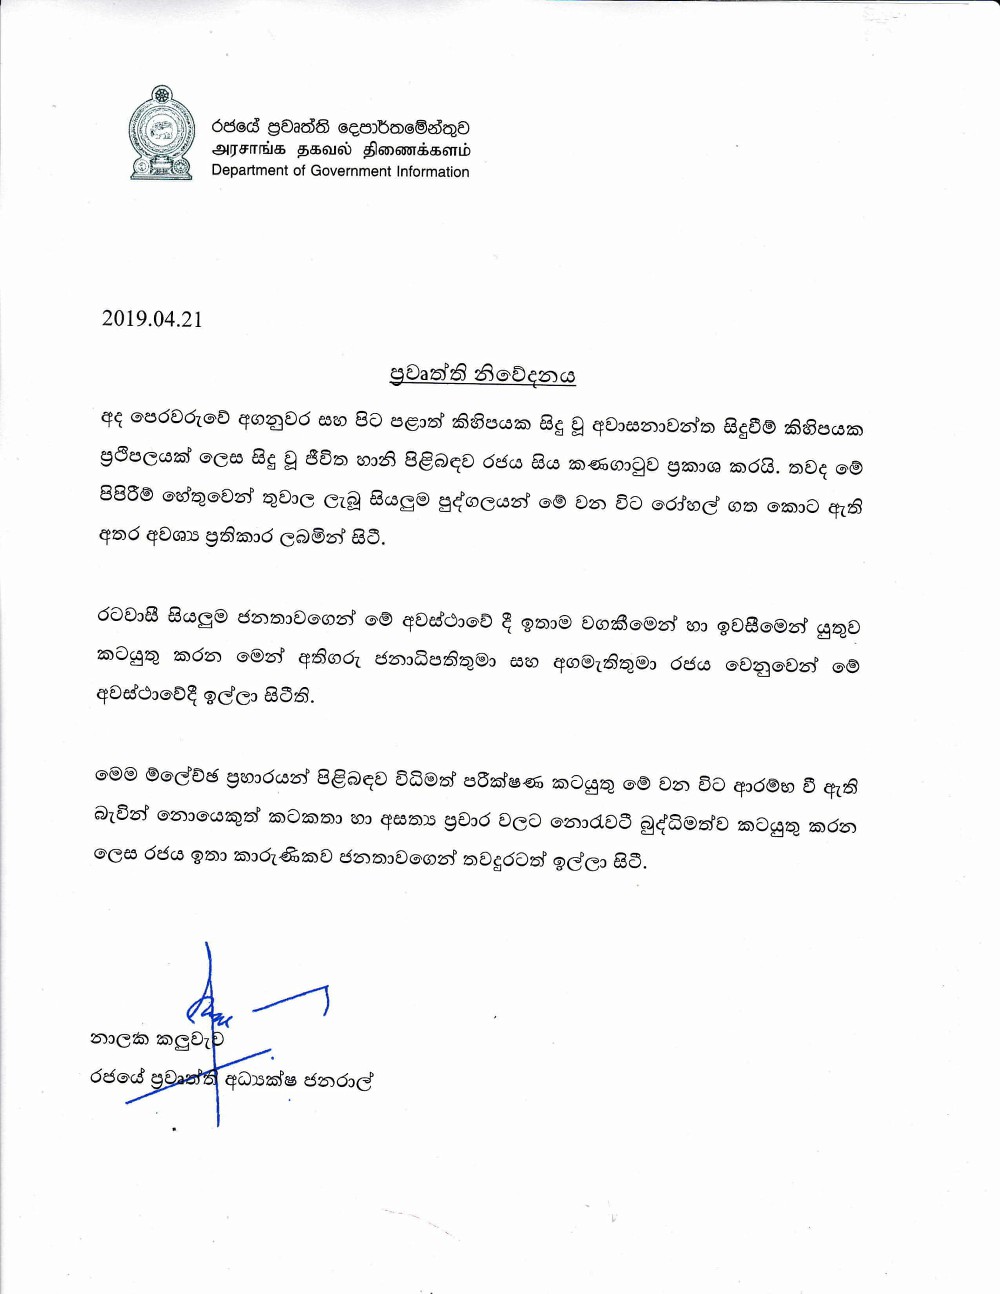 Press Release on 21.04.21019 S 2